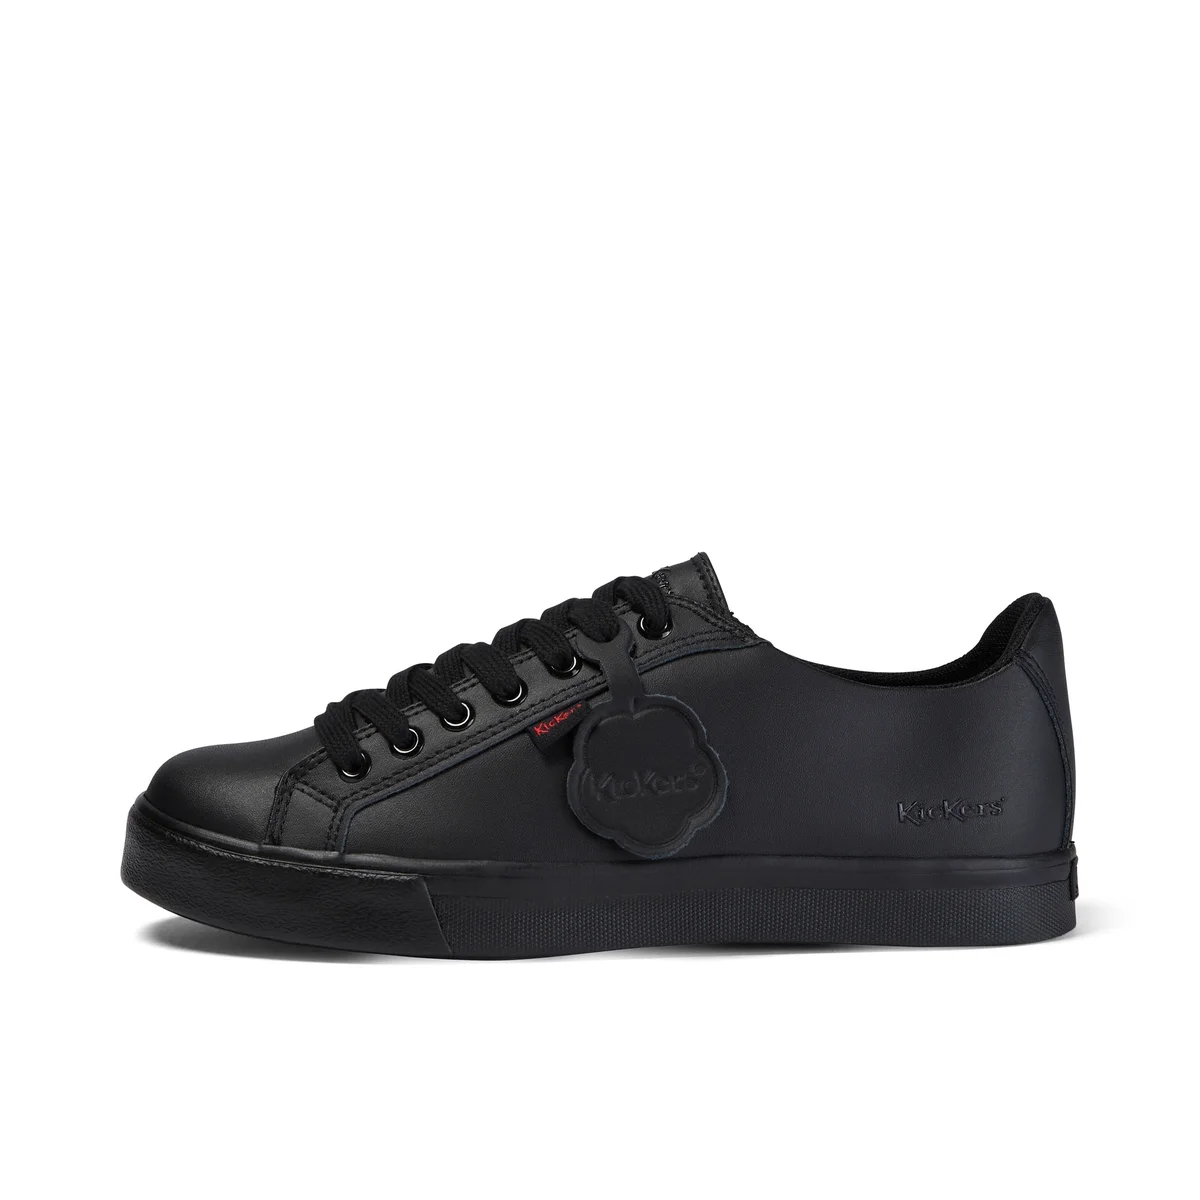 Kickers Youth Tovni Lacer Leather Shoes - Black Image 1